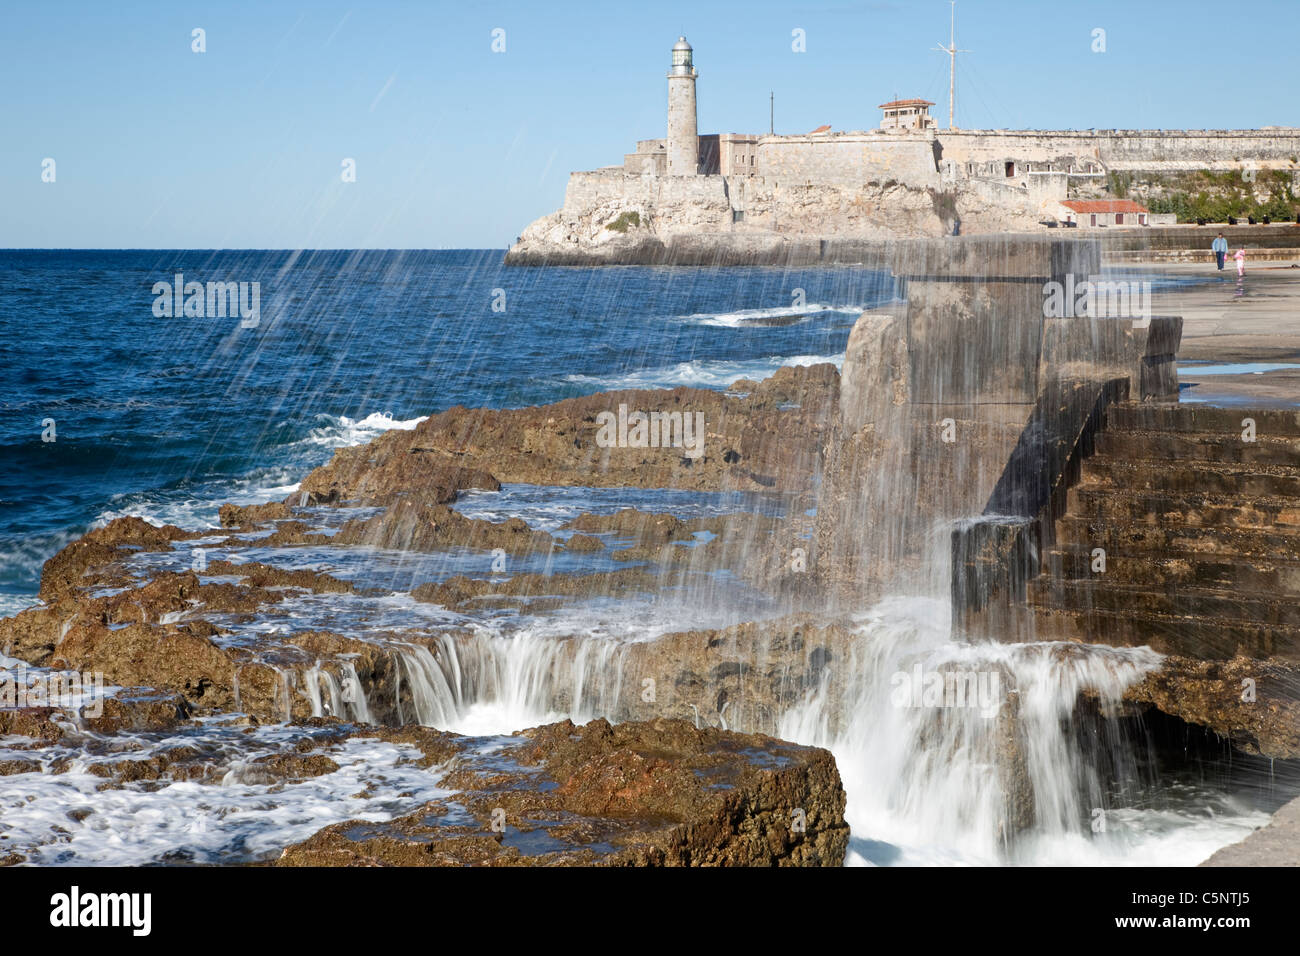 Fort cuba hi-res stock photography and images - Alamy